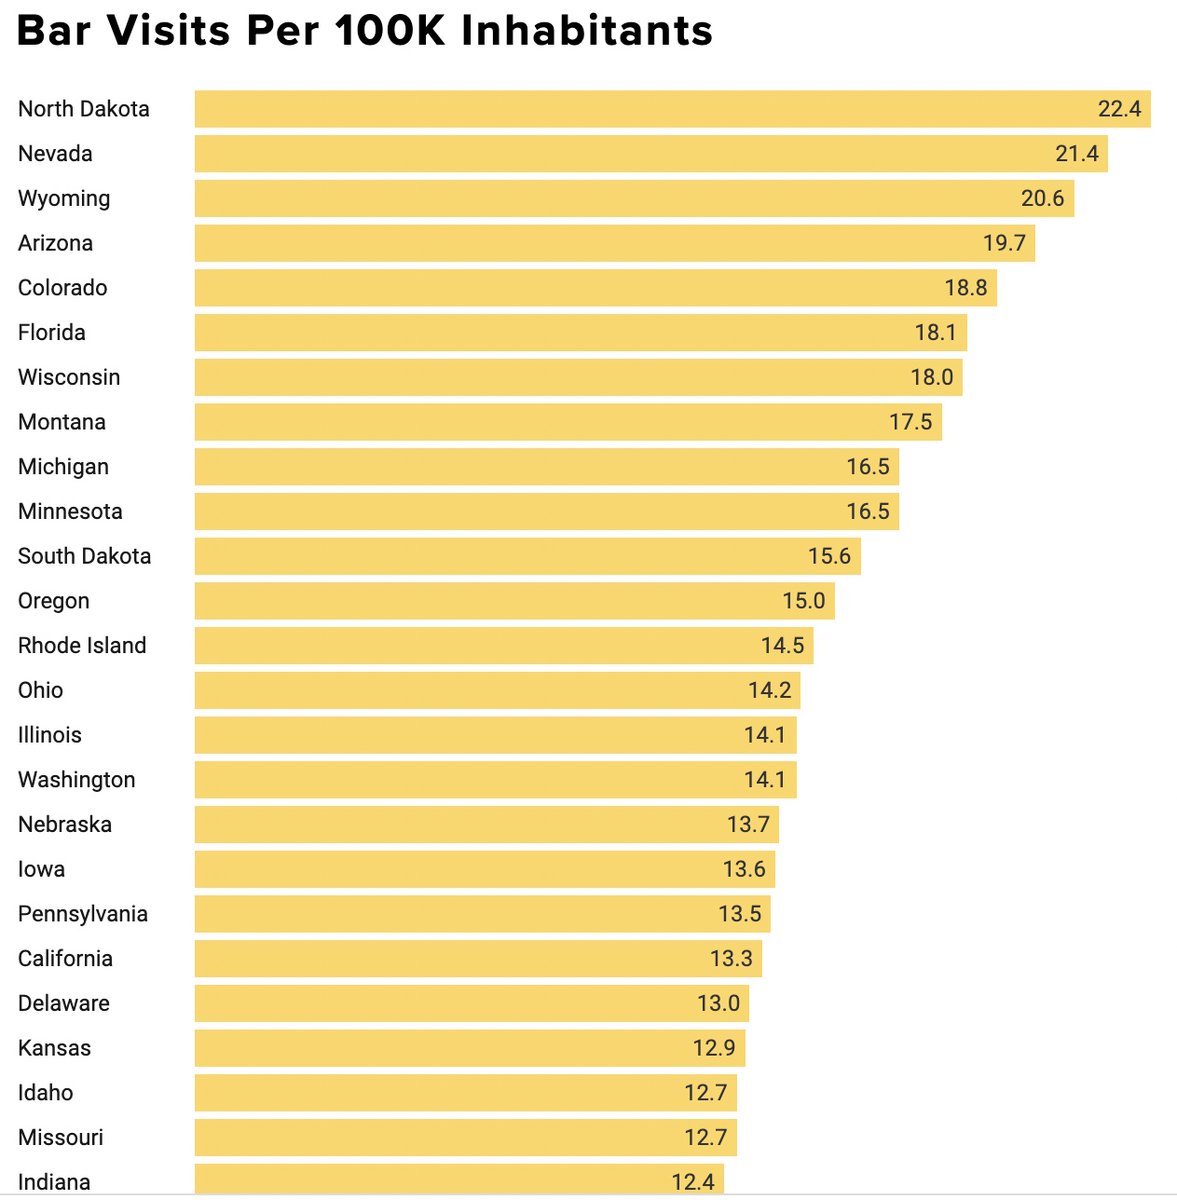 Who&#39;s ready for useless information from a random source? 

Nevada is #2 in Bar Visits Per 100K Inhabitants